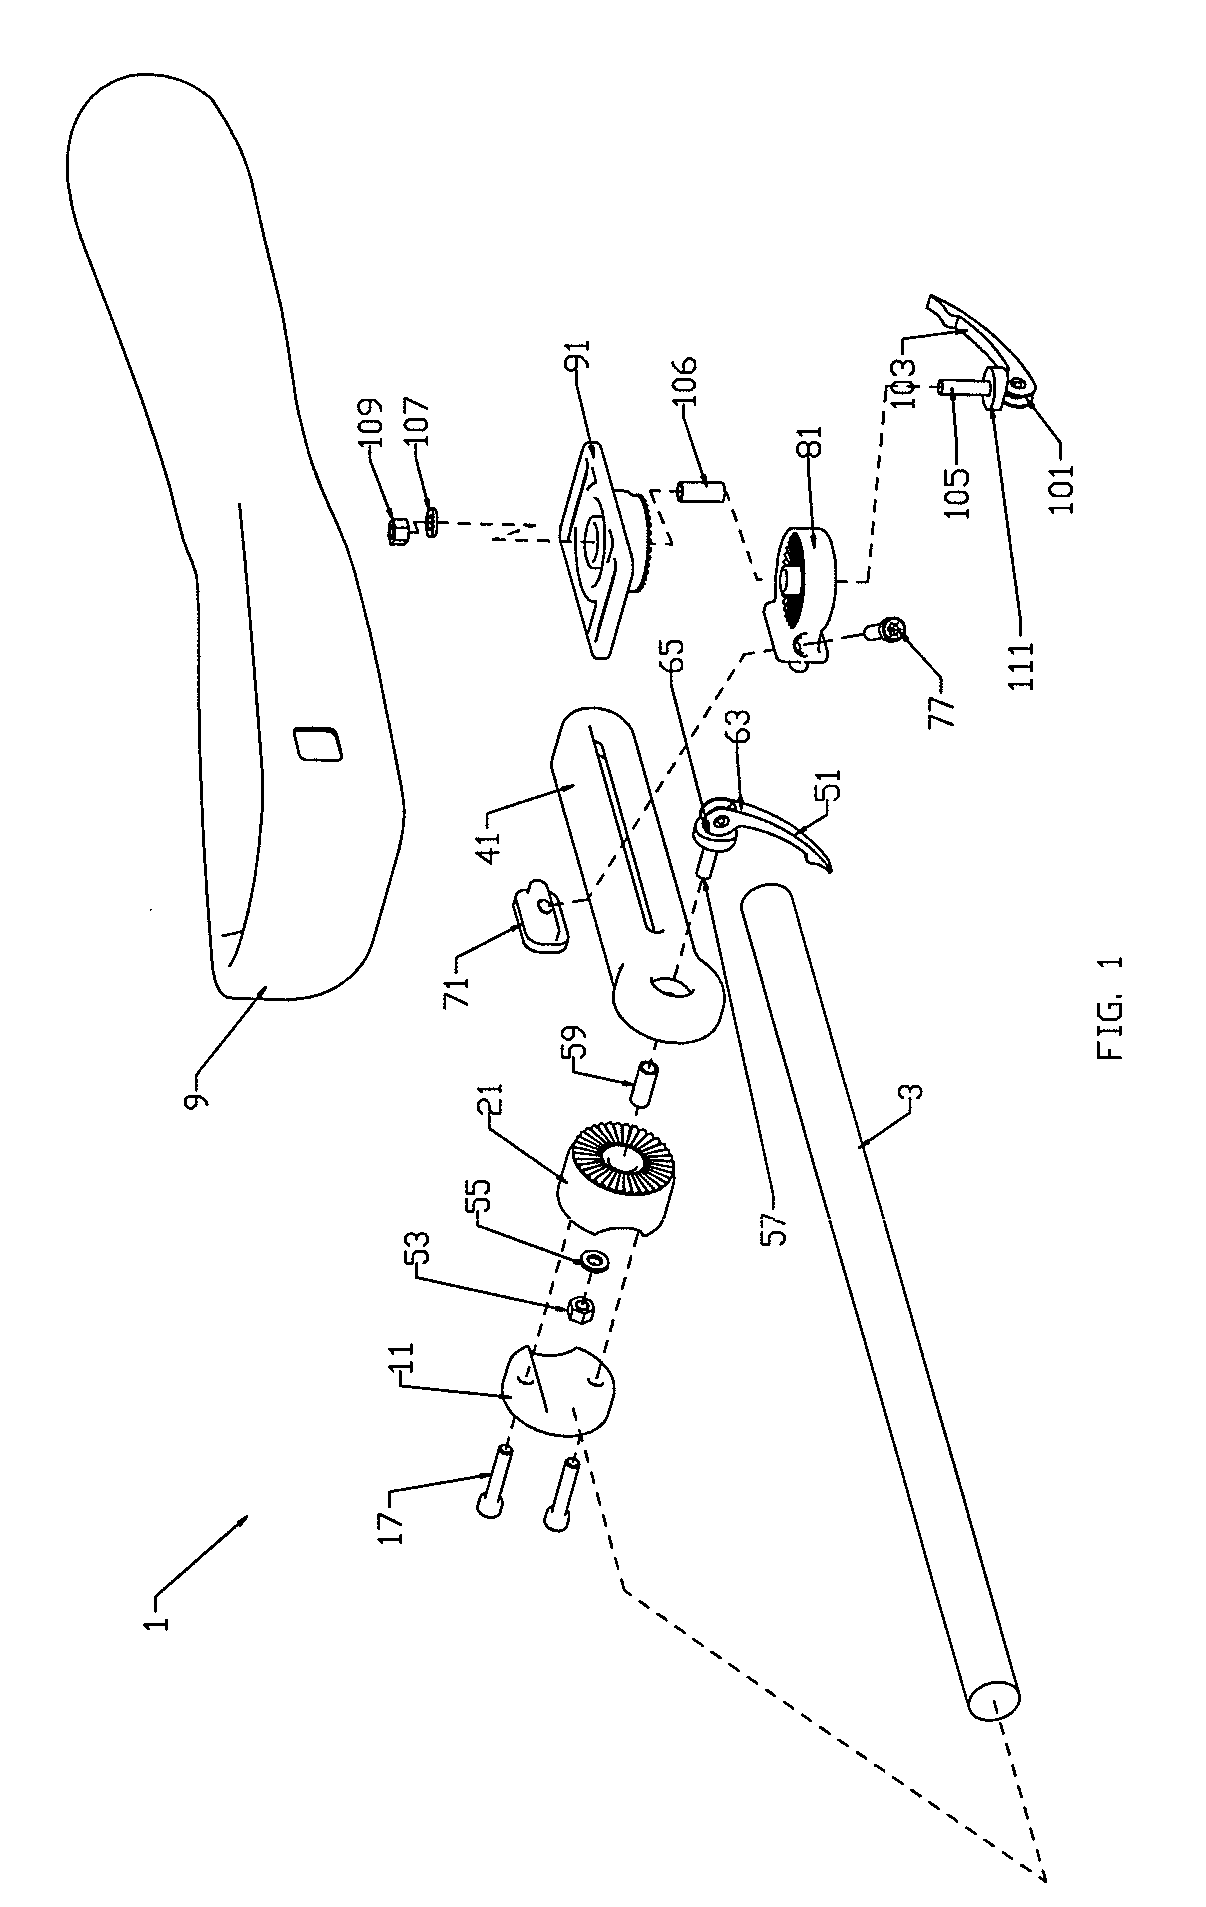 Apparatus for mounting a wheelchair arm pad